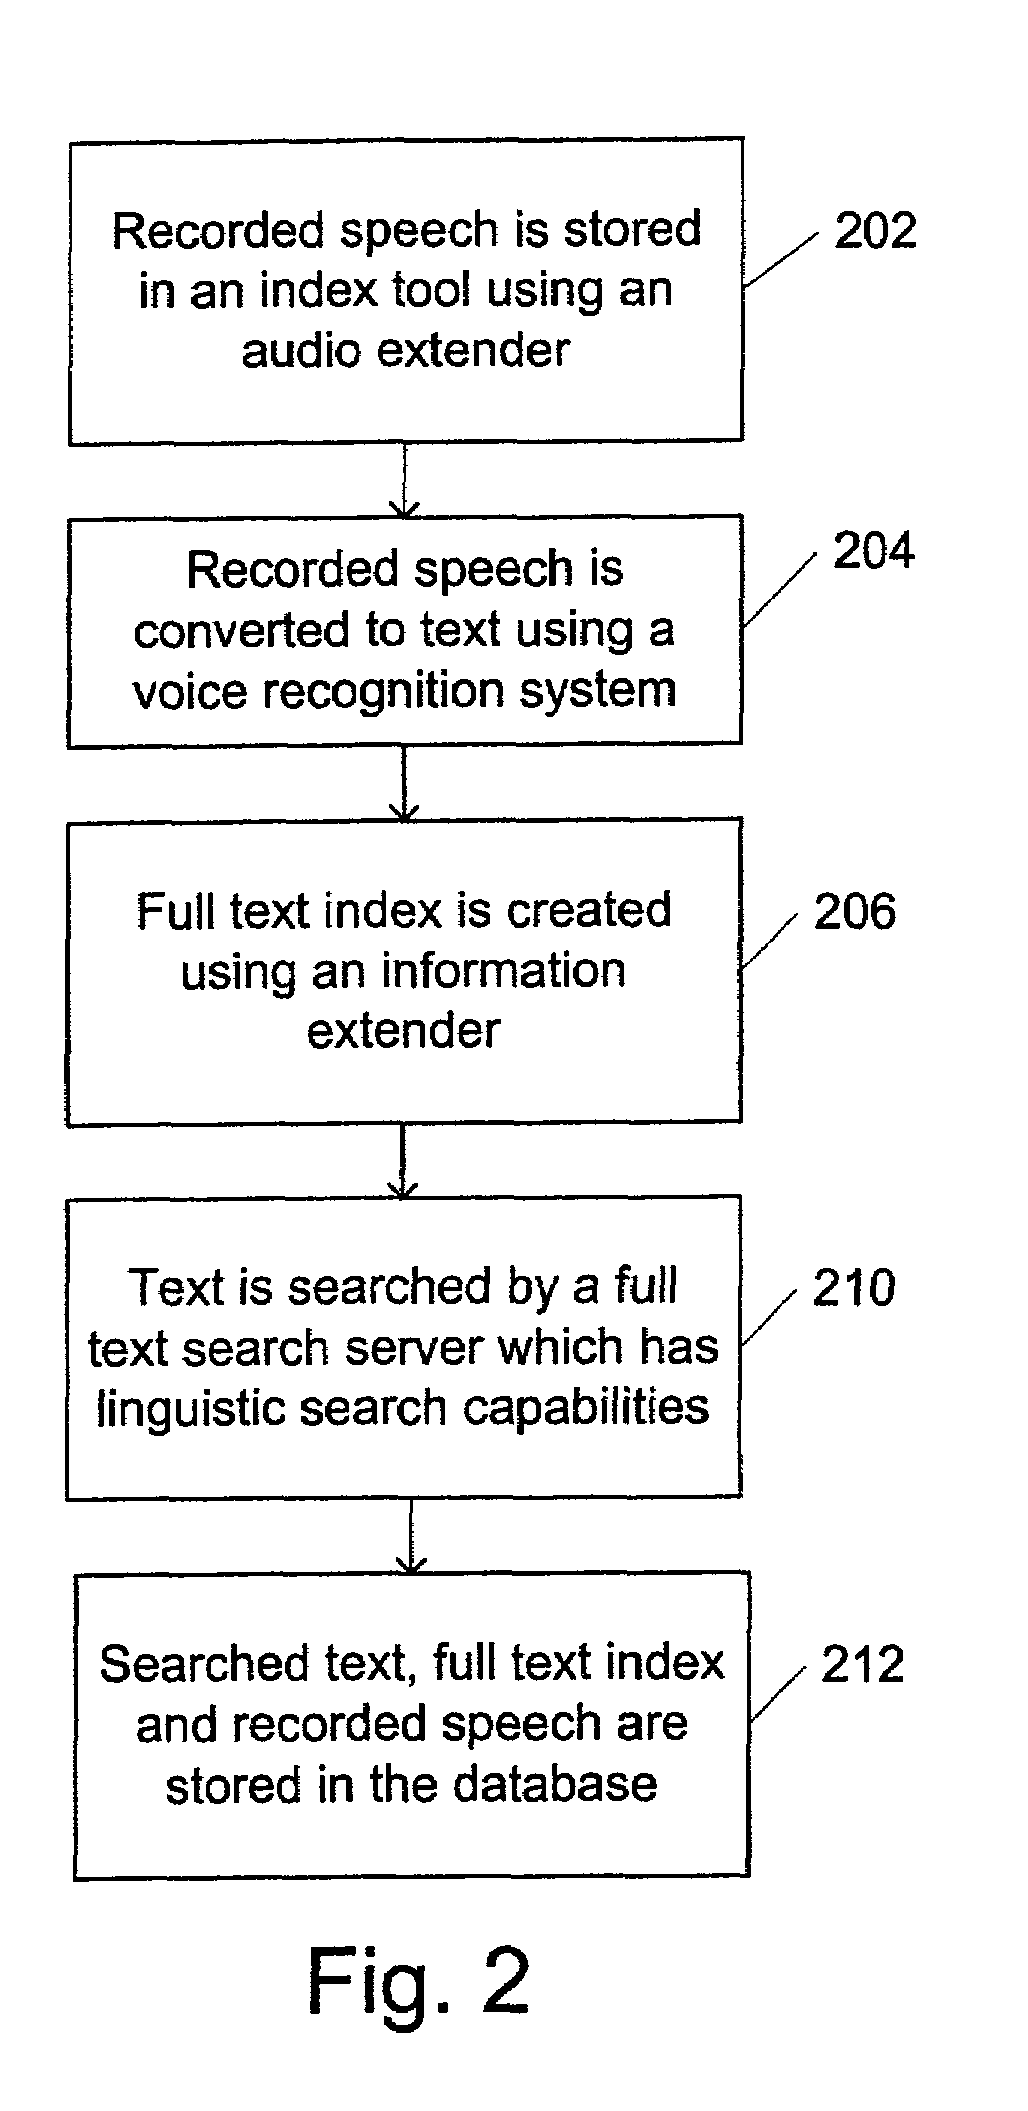 Method and system for searching recorded speech and retrieving relevant segments